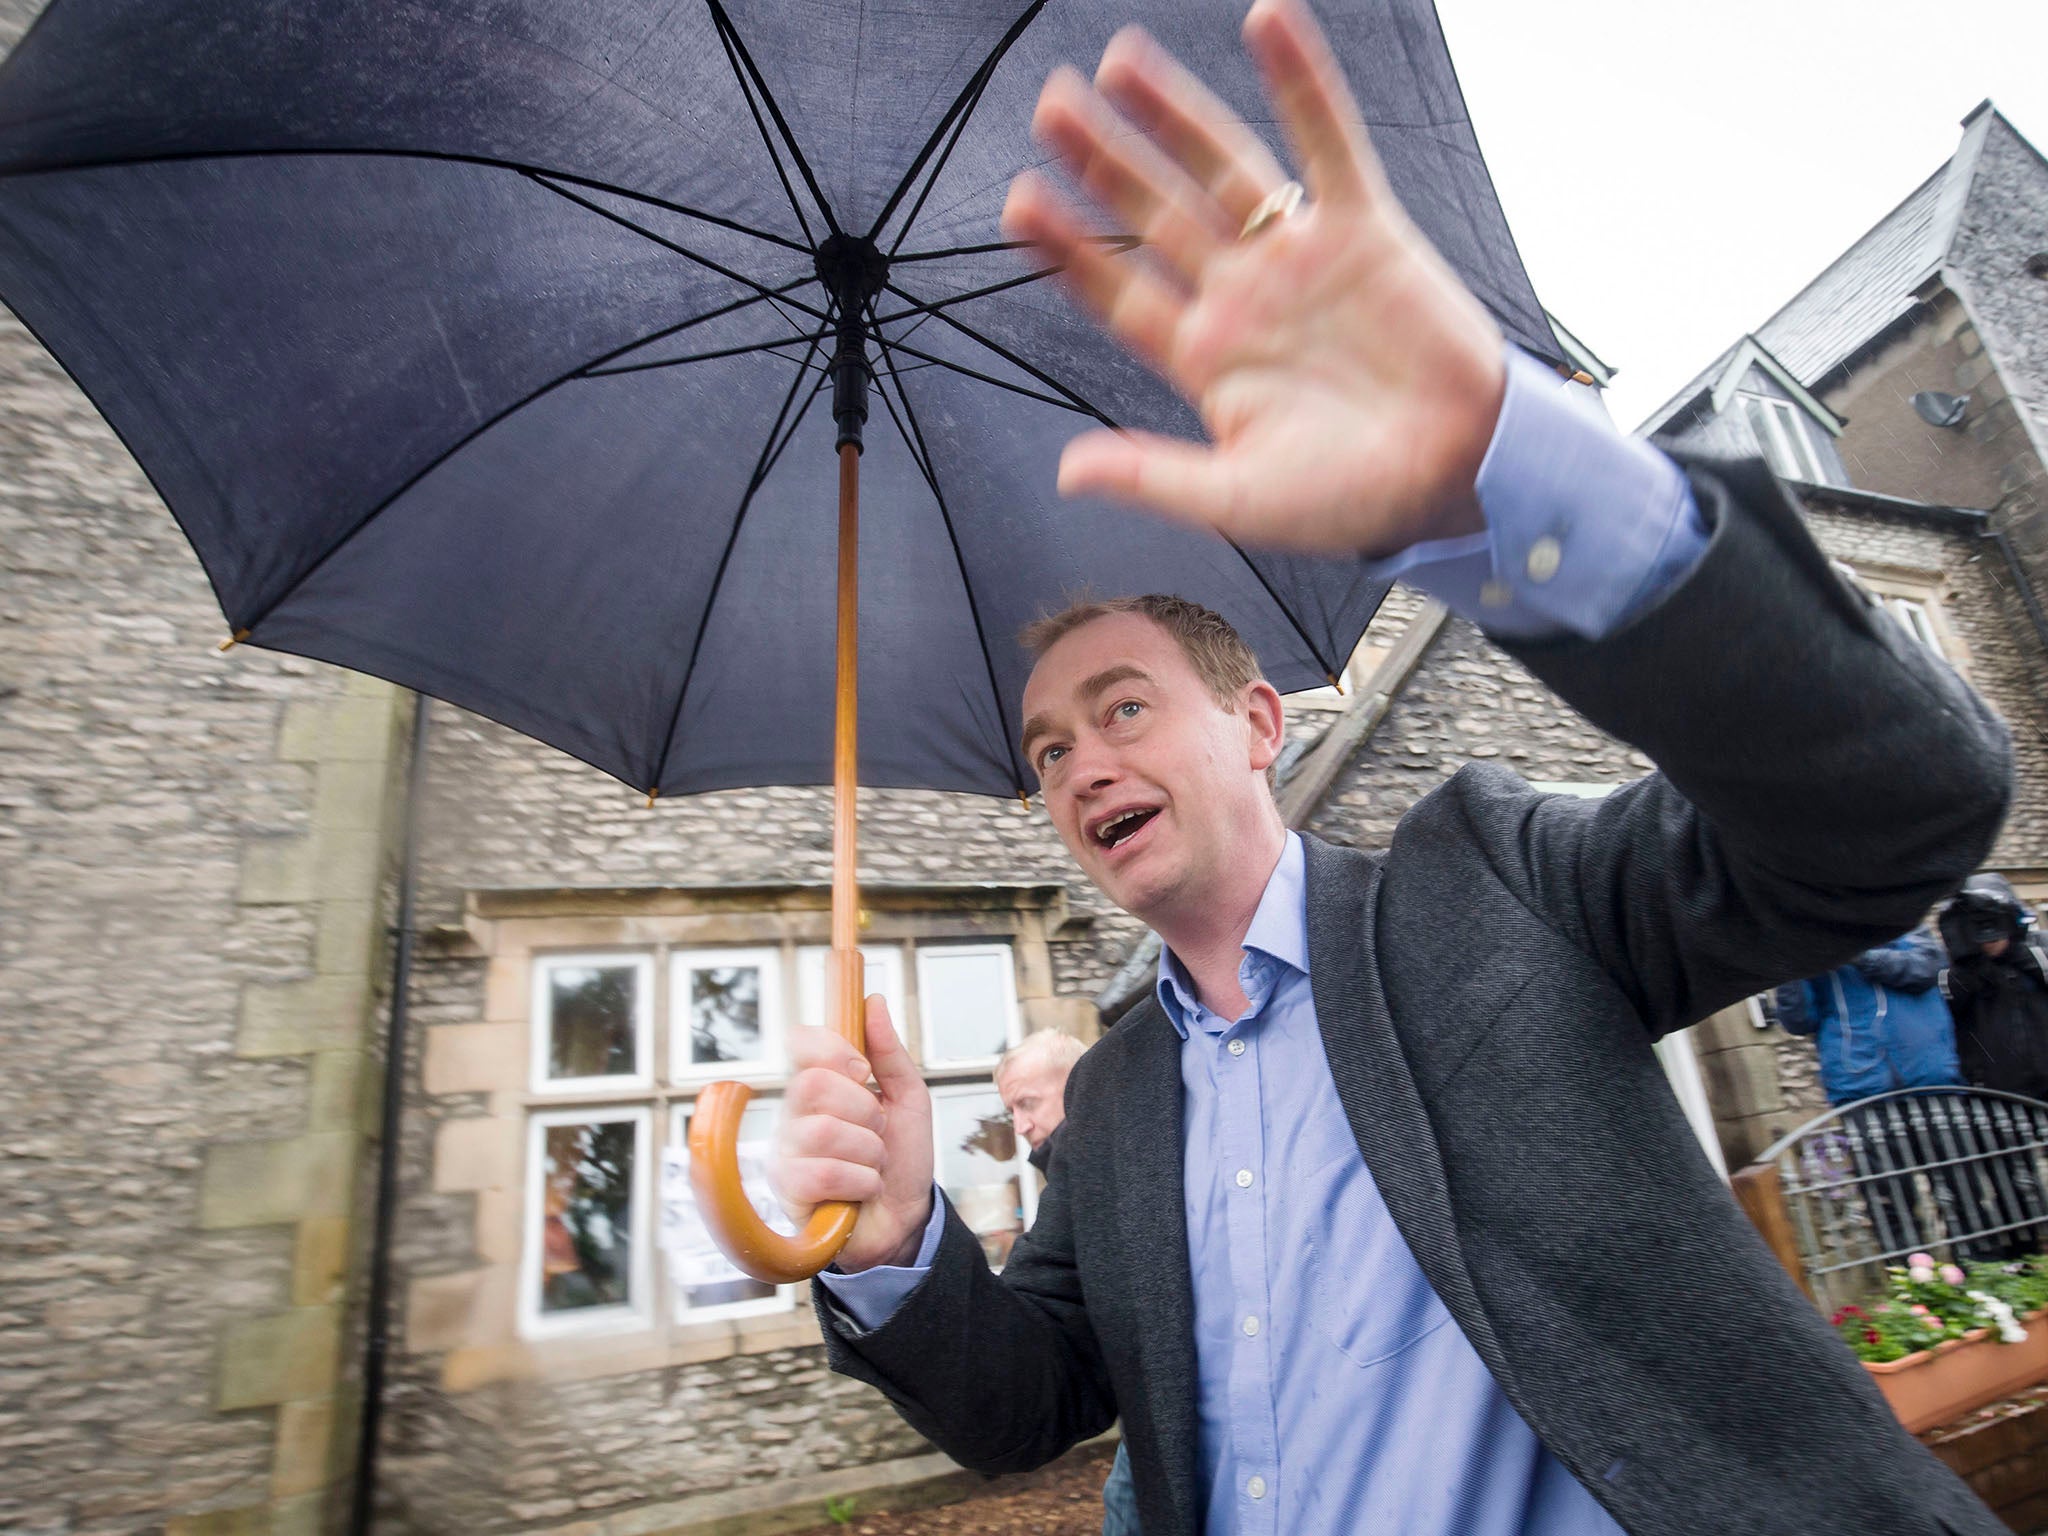 Lib Dems leader Tim Farron outside a polling station at Stonecross Manor Hotel in Kendal, Cumbria